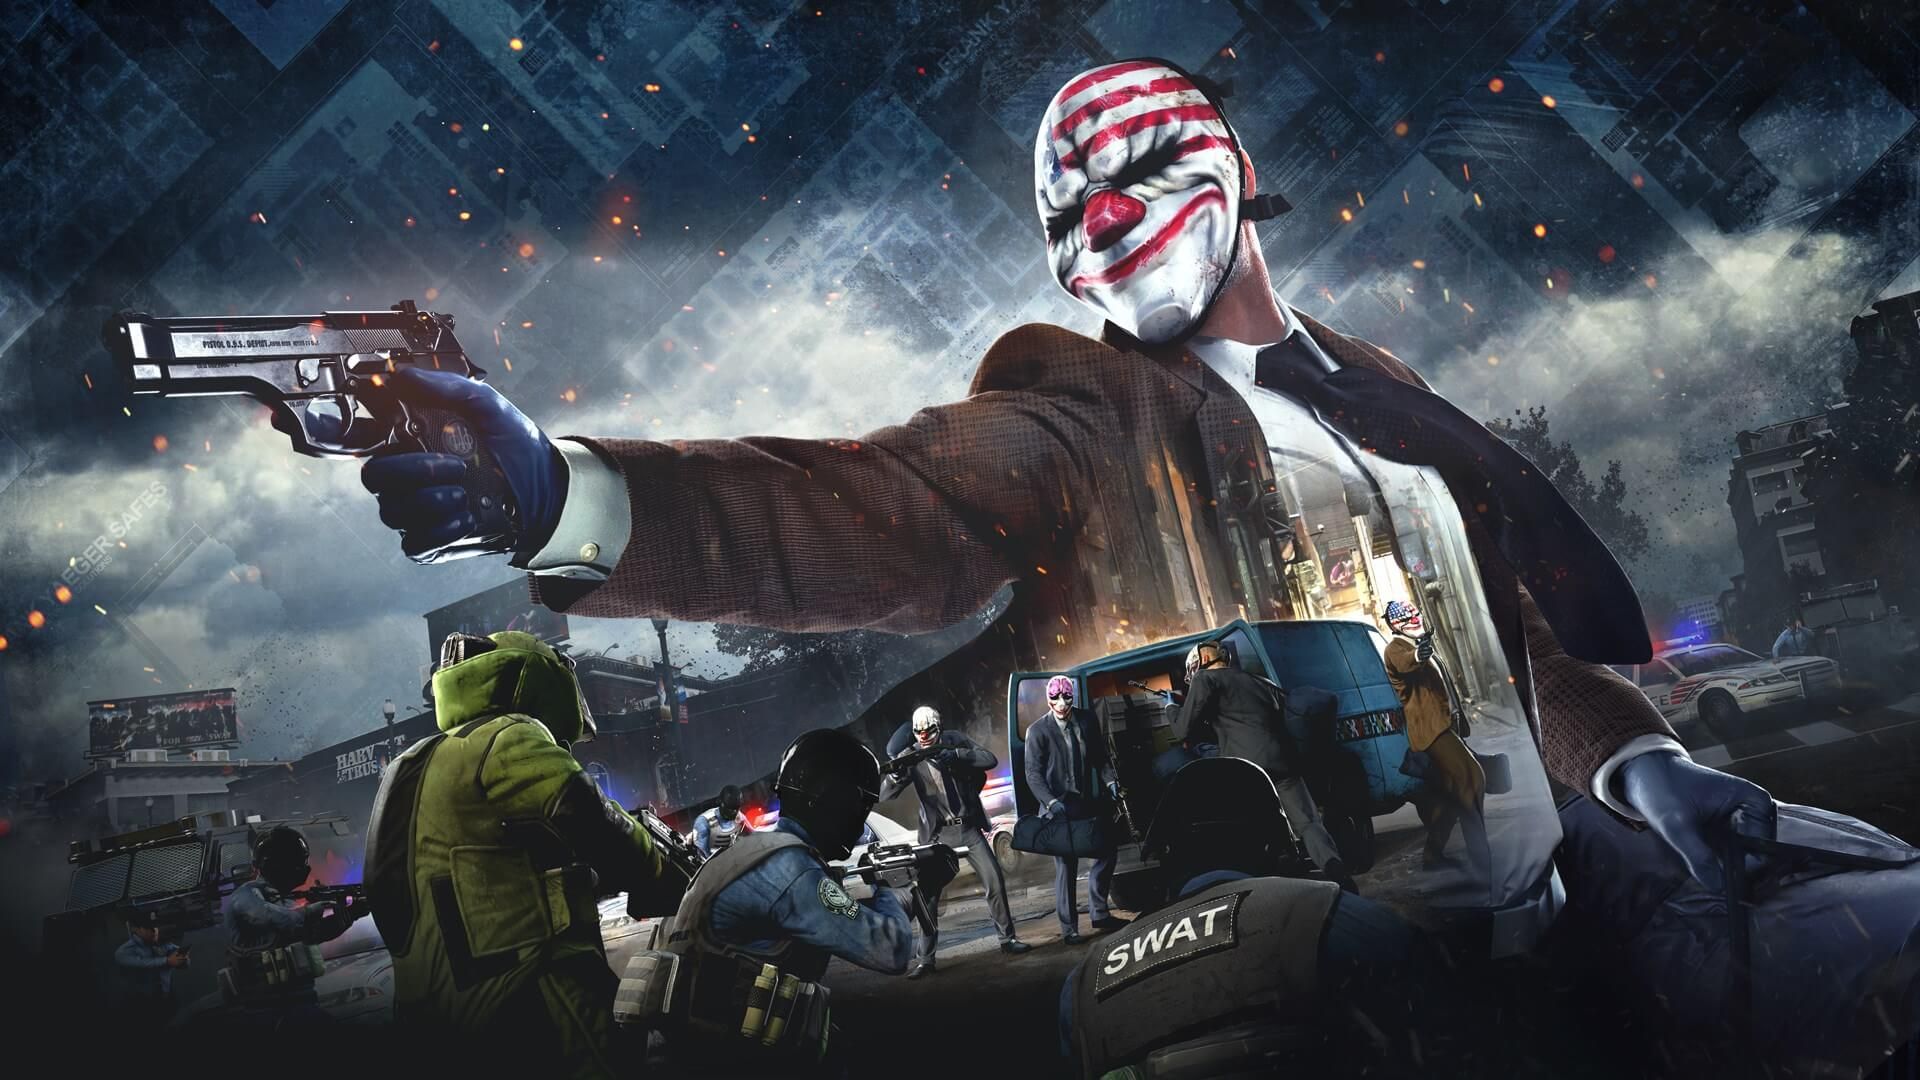 Tekken's History of Unexpected Collabs Might Continue With Payday 2